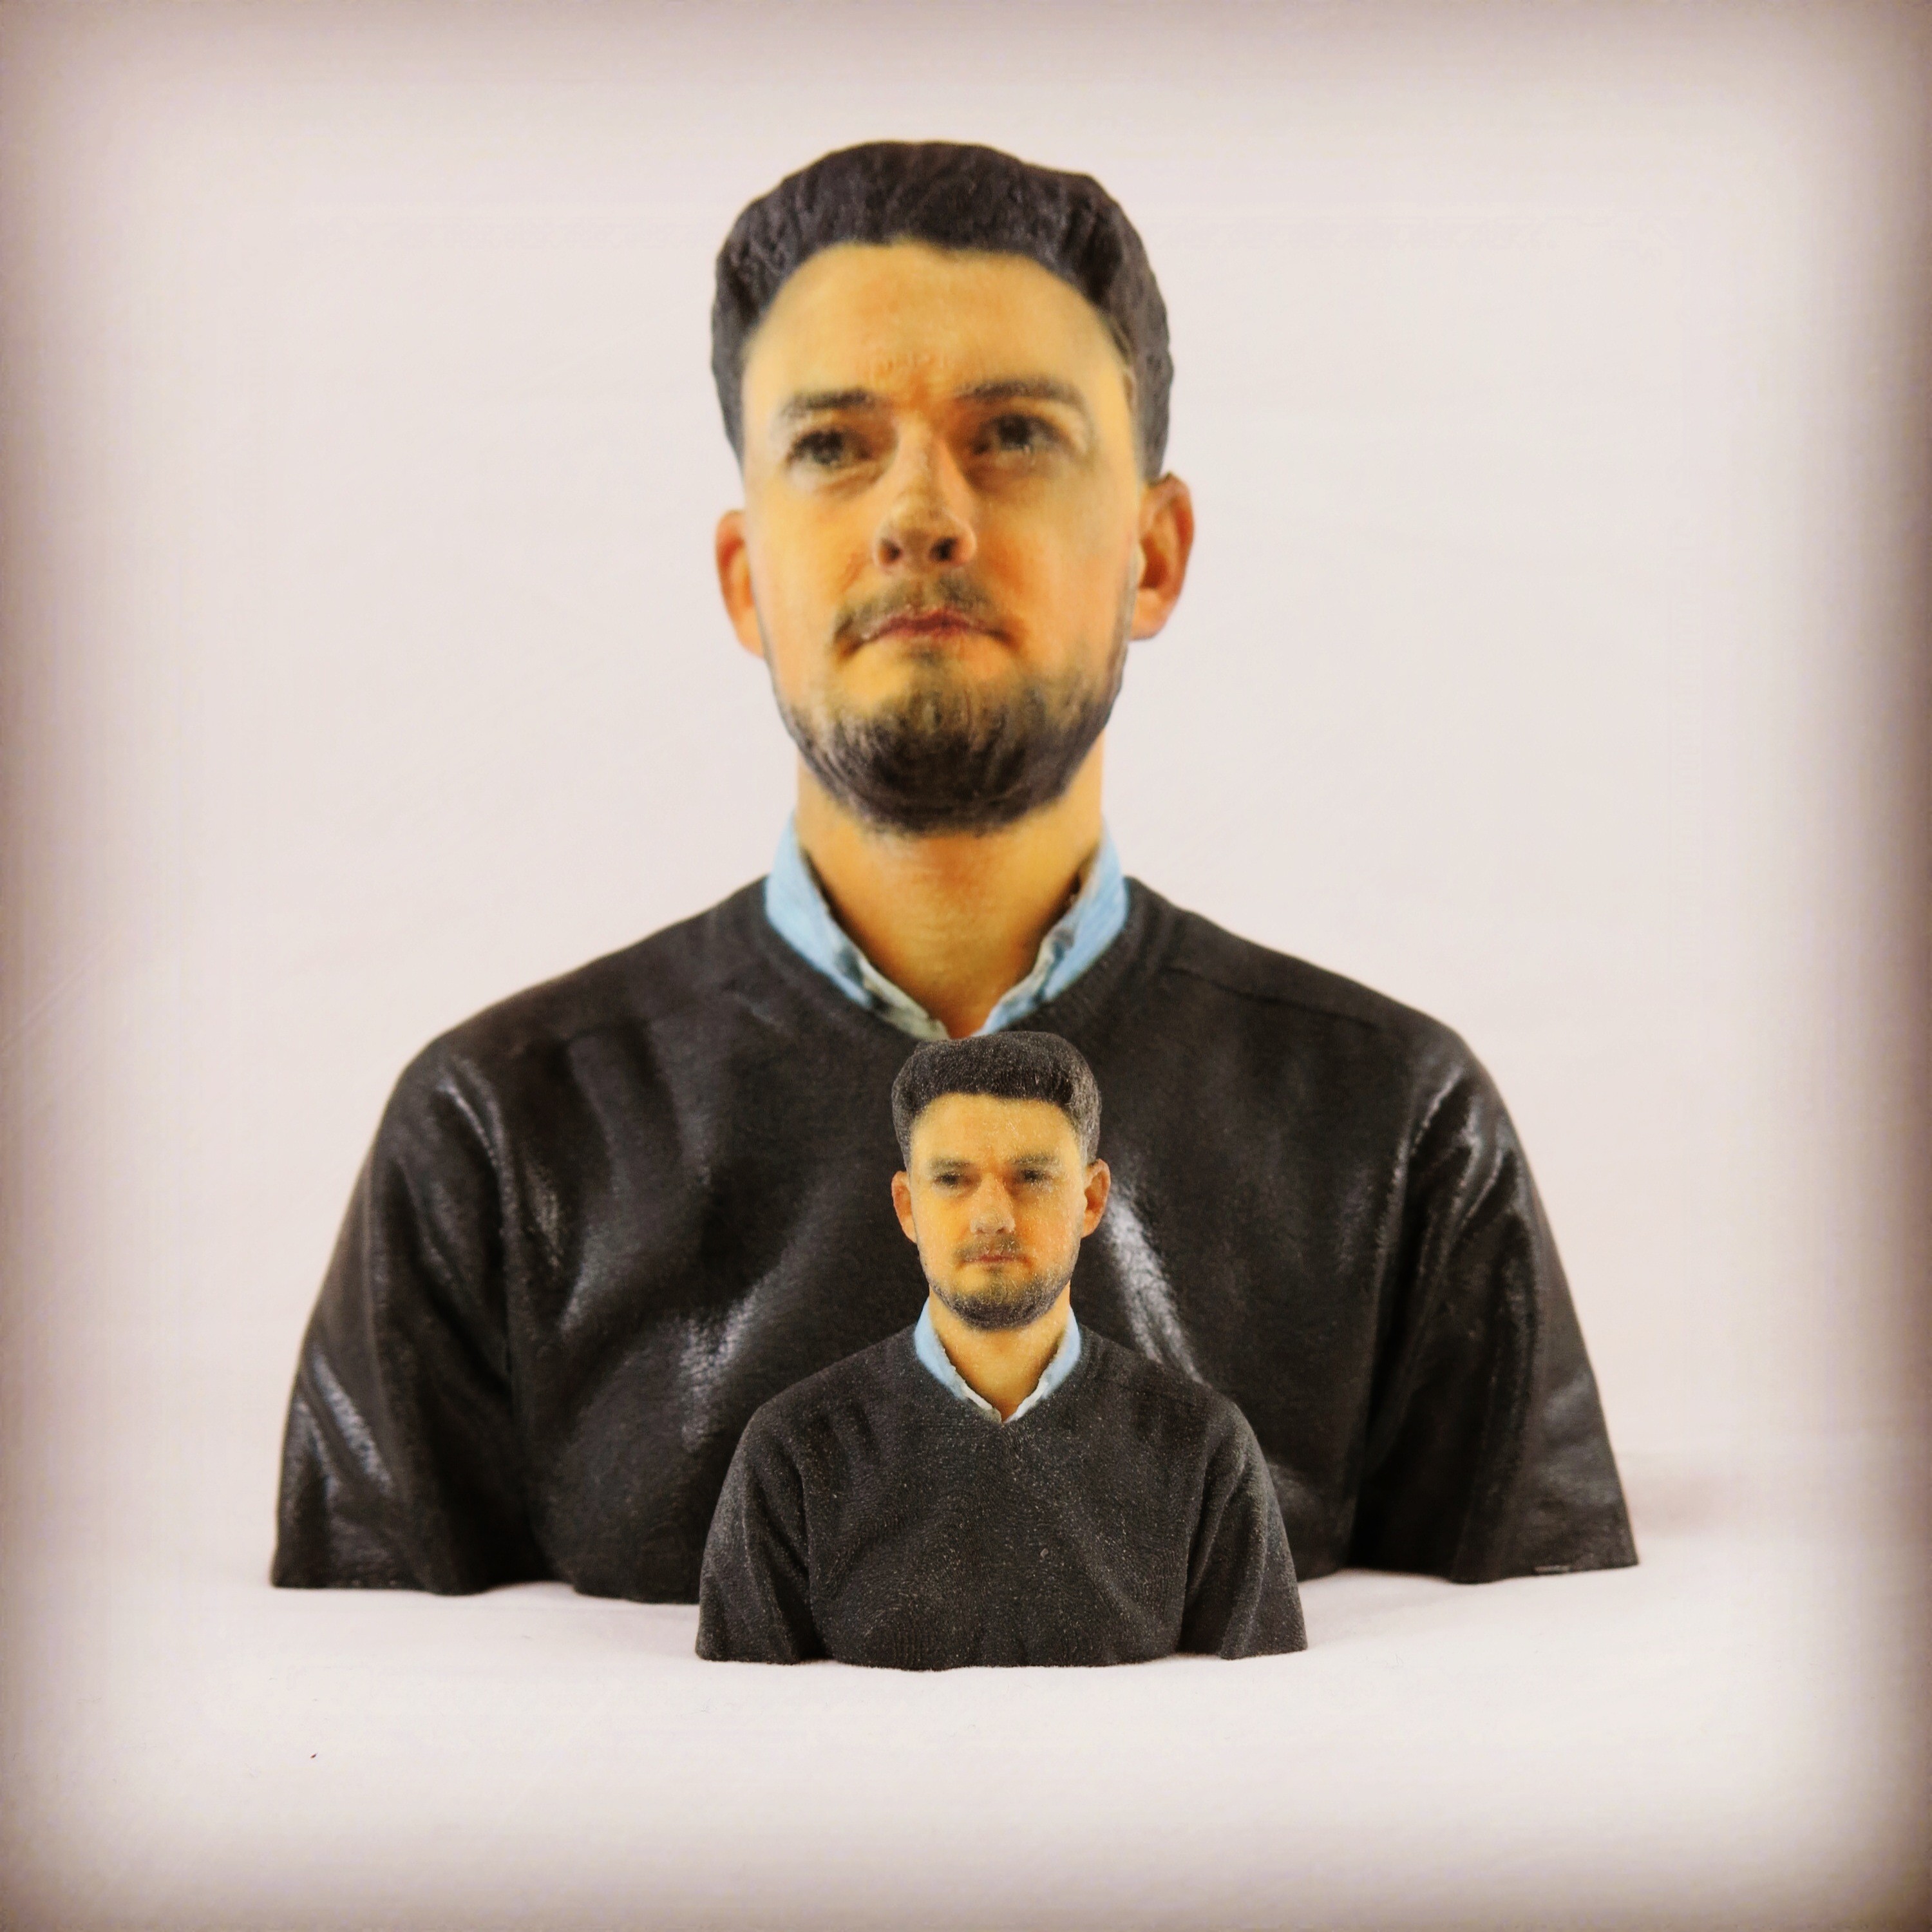 Get your hands on your 3D printed HD selfie!